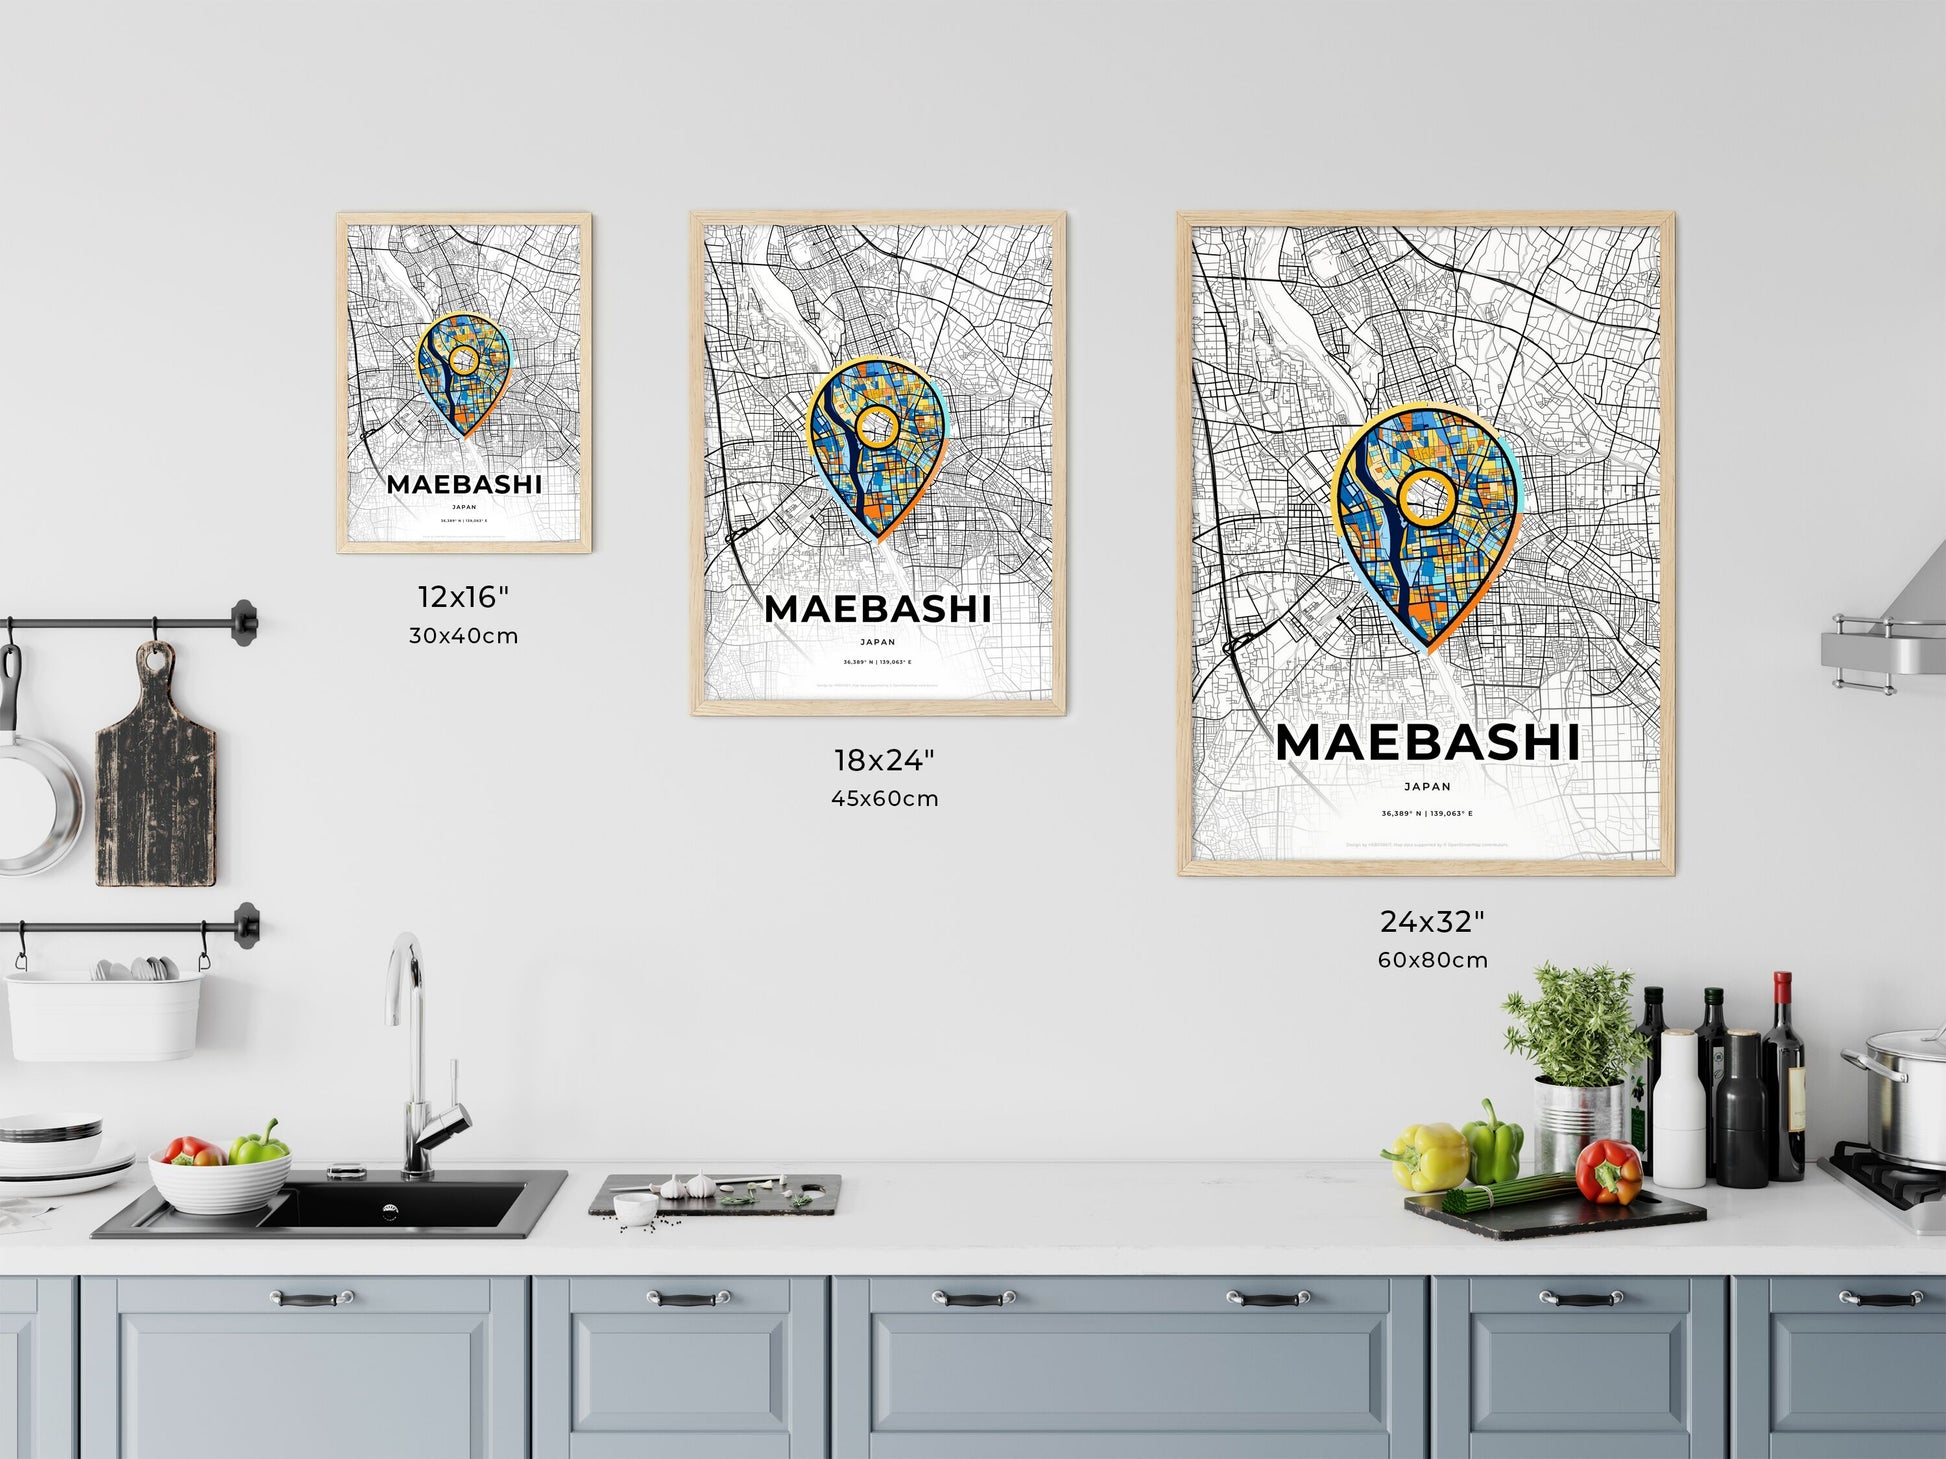 MAEBASHI JAPAN minimal art map with a colorful icon. Where it all began, Couple map gift.